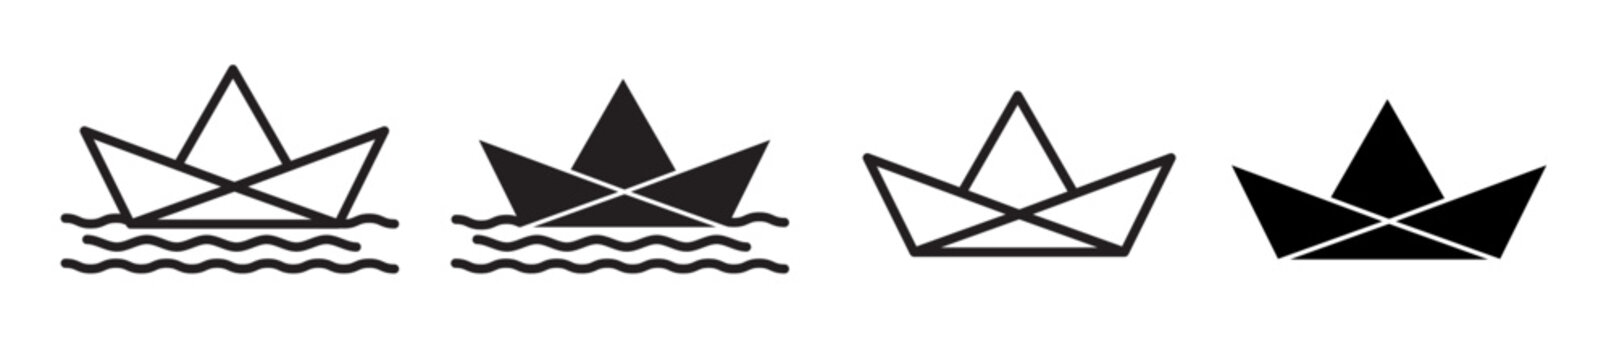 Craft paper boat vector icon set. Origami toy boat shape icons. 